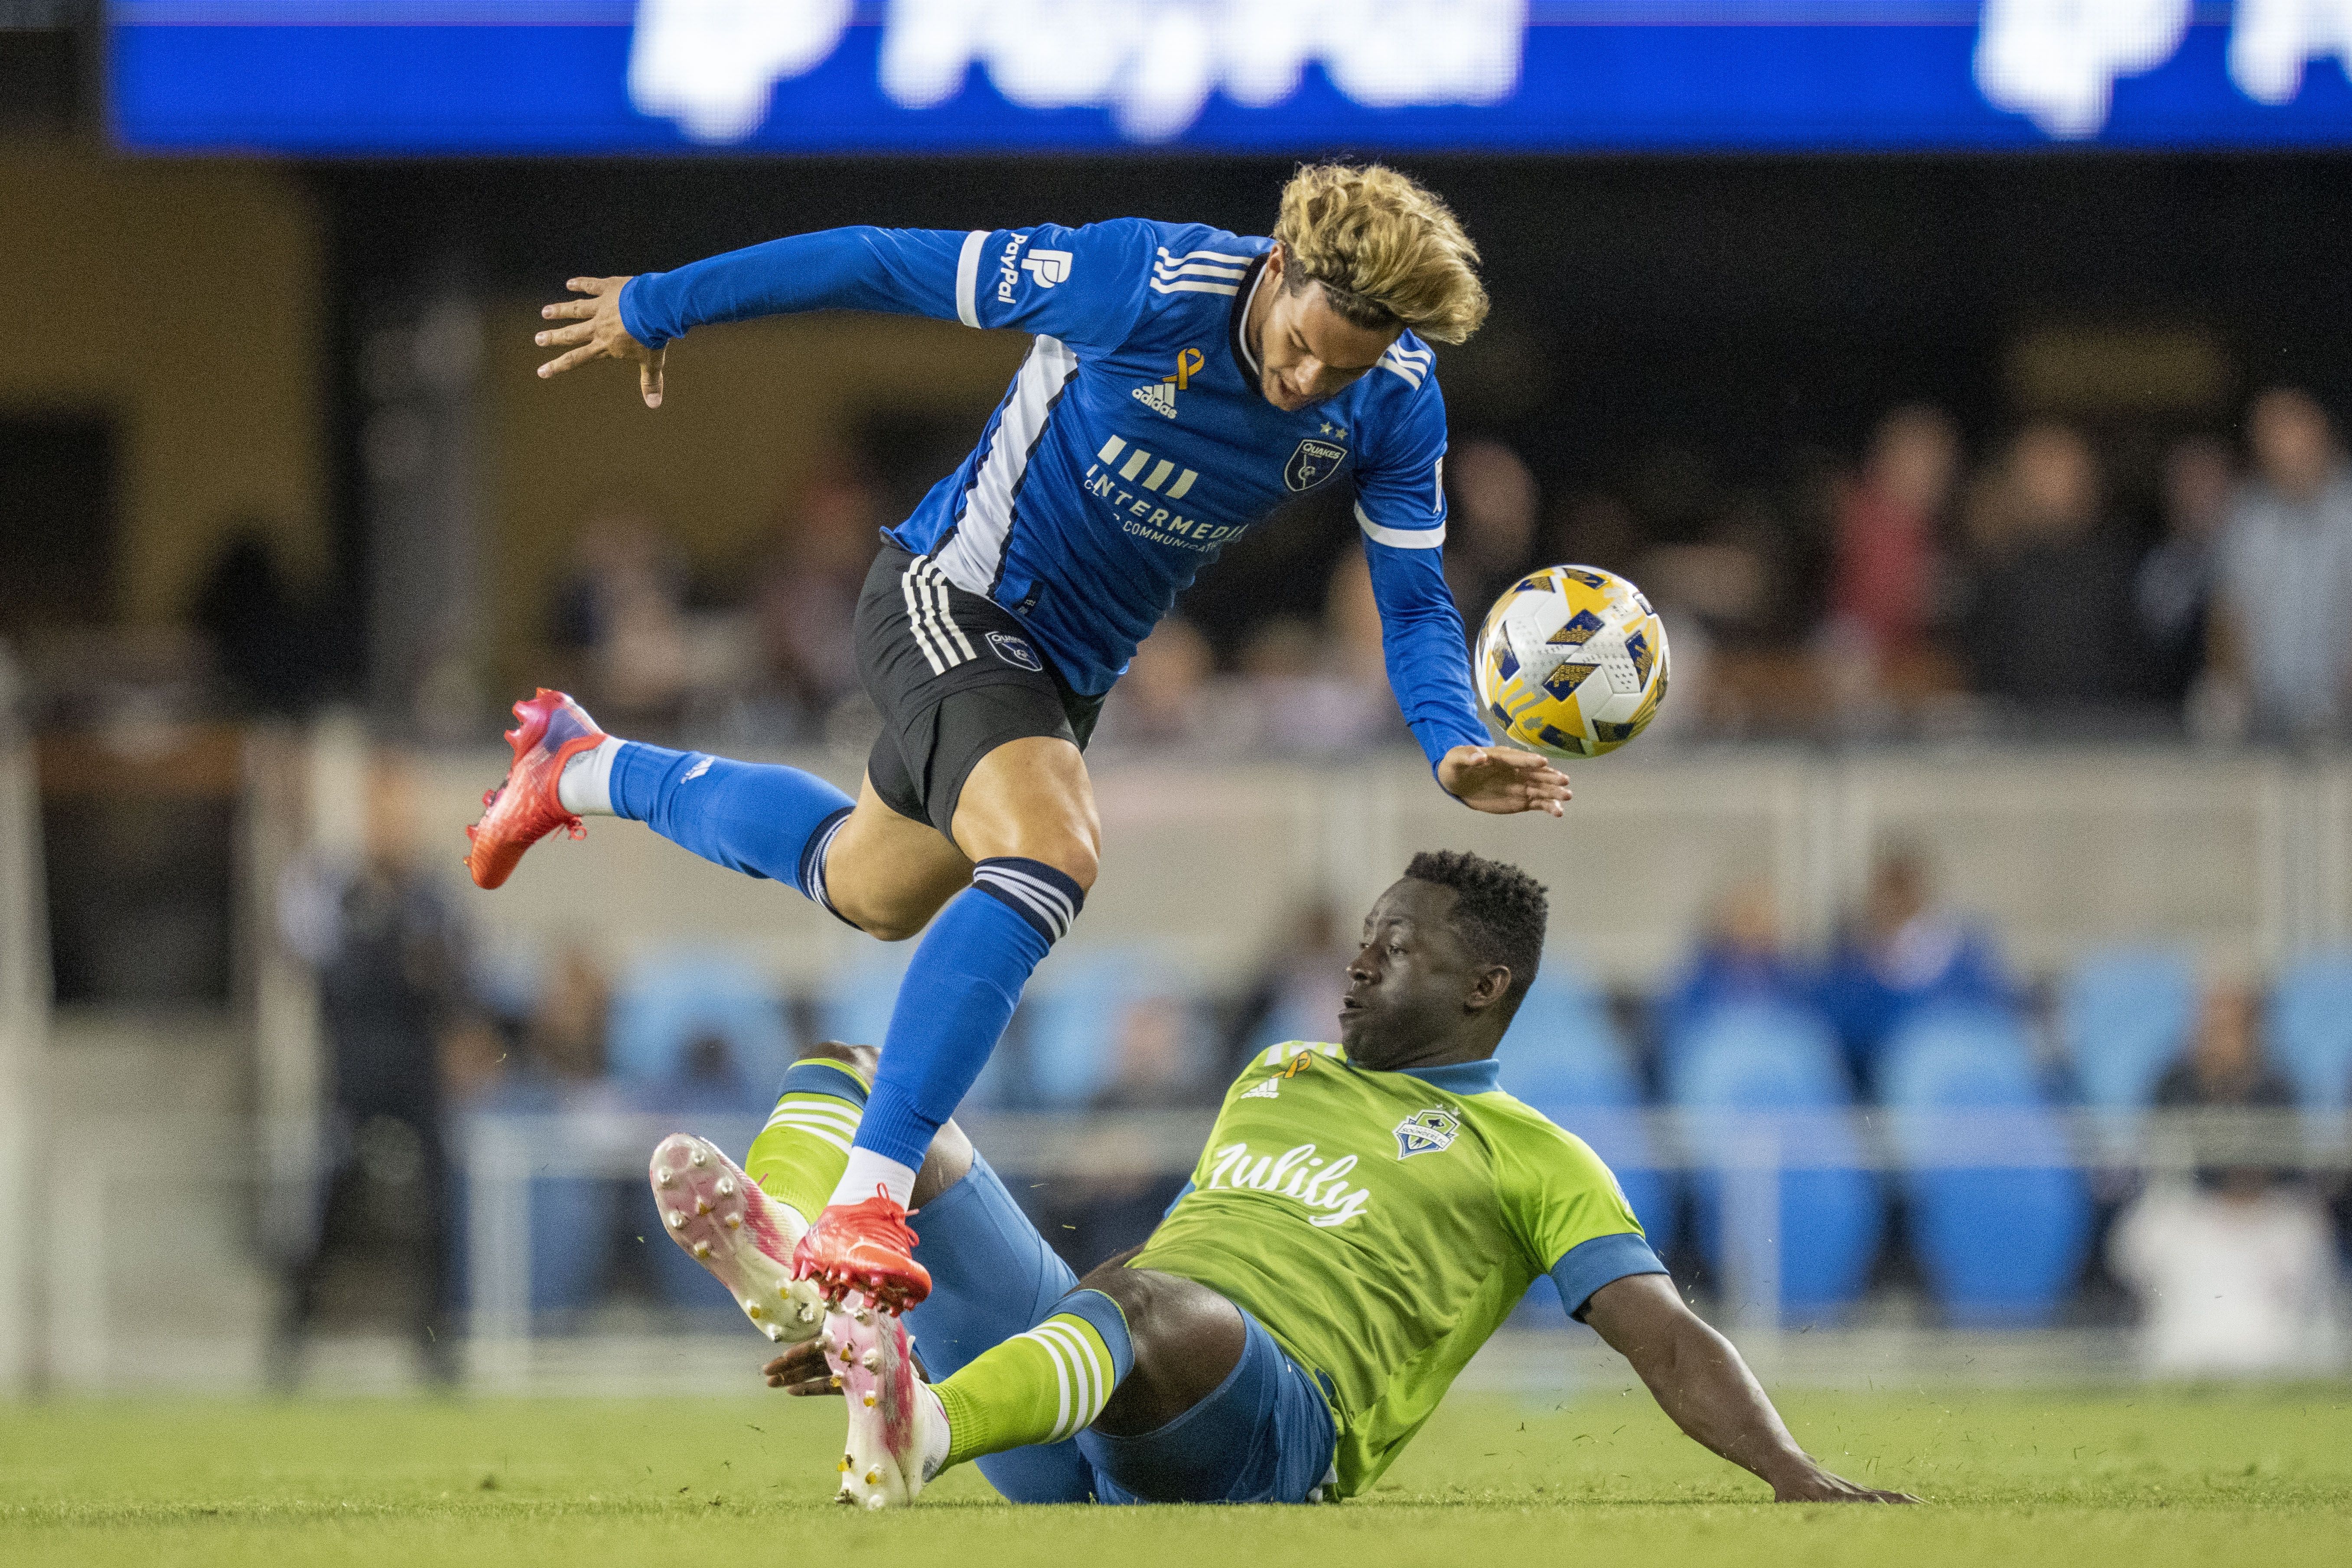 Kyle Terada / USA TODAY Sports; Alpha 1, FE 400mm f/2.8 GM OSS, 1/1600, f/2.8, ISO 4000; September 29, 2021; San Jose, California, USA; San Jose Earthquakes forward Cade Cowell (44, top) fights for the ball with Seattle Sounders defender Yeimar Gomez (28, bottom) during the second half at PayPal Park.